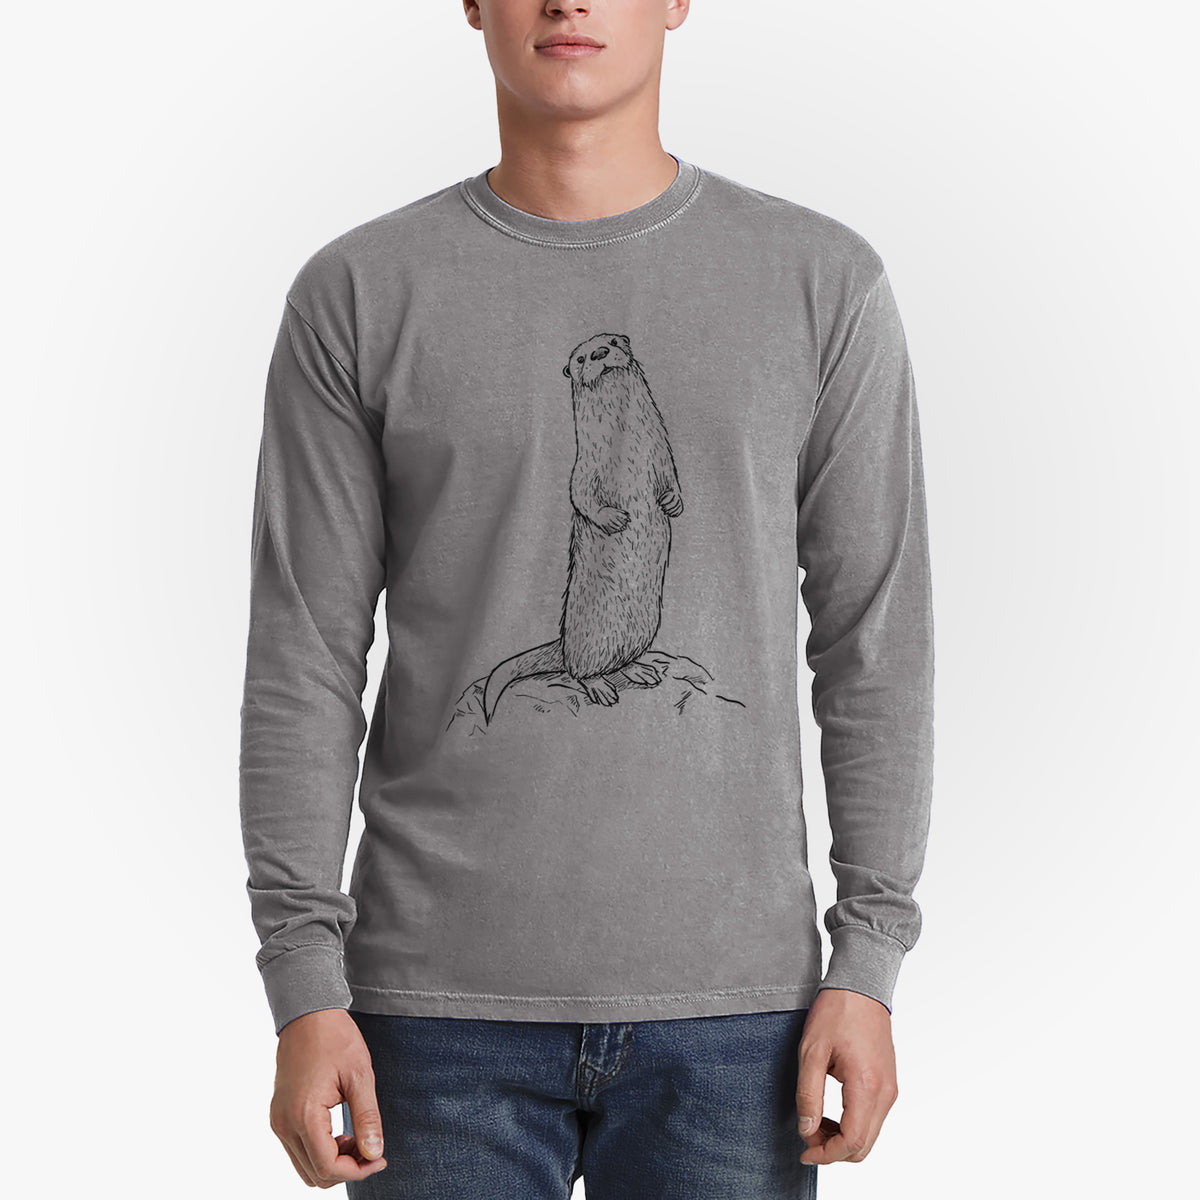 North American River Otter - Lontra canadensis - Heavyweight 100% Cotton Long Sleeve